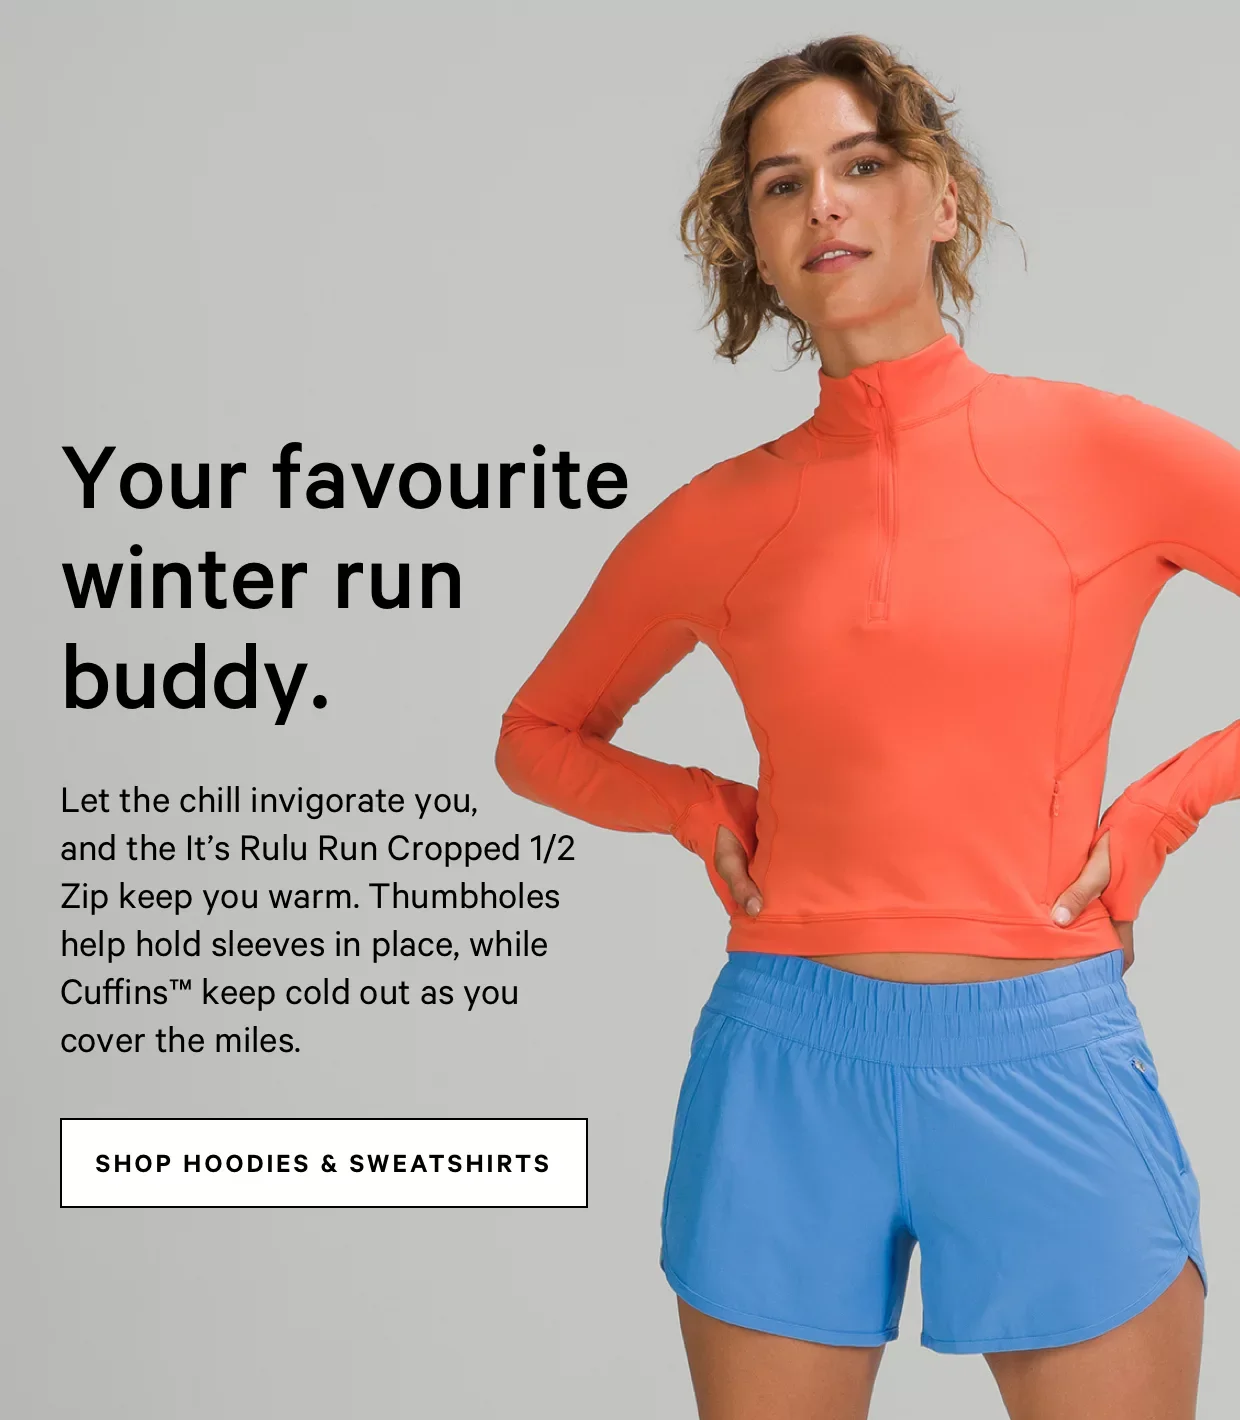 lululemon: Heat up your pace in Warm Coral